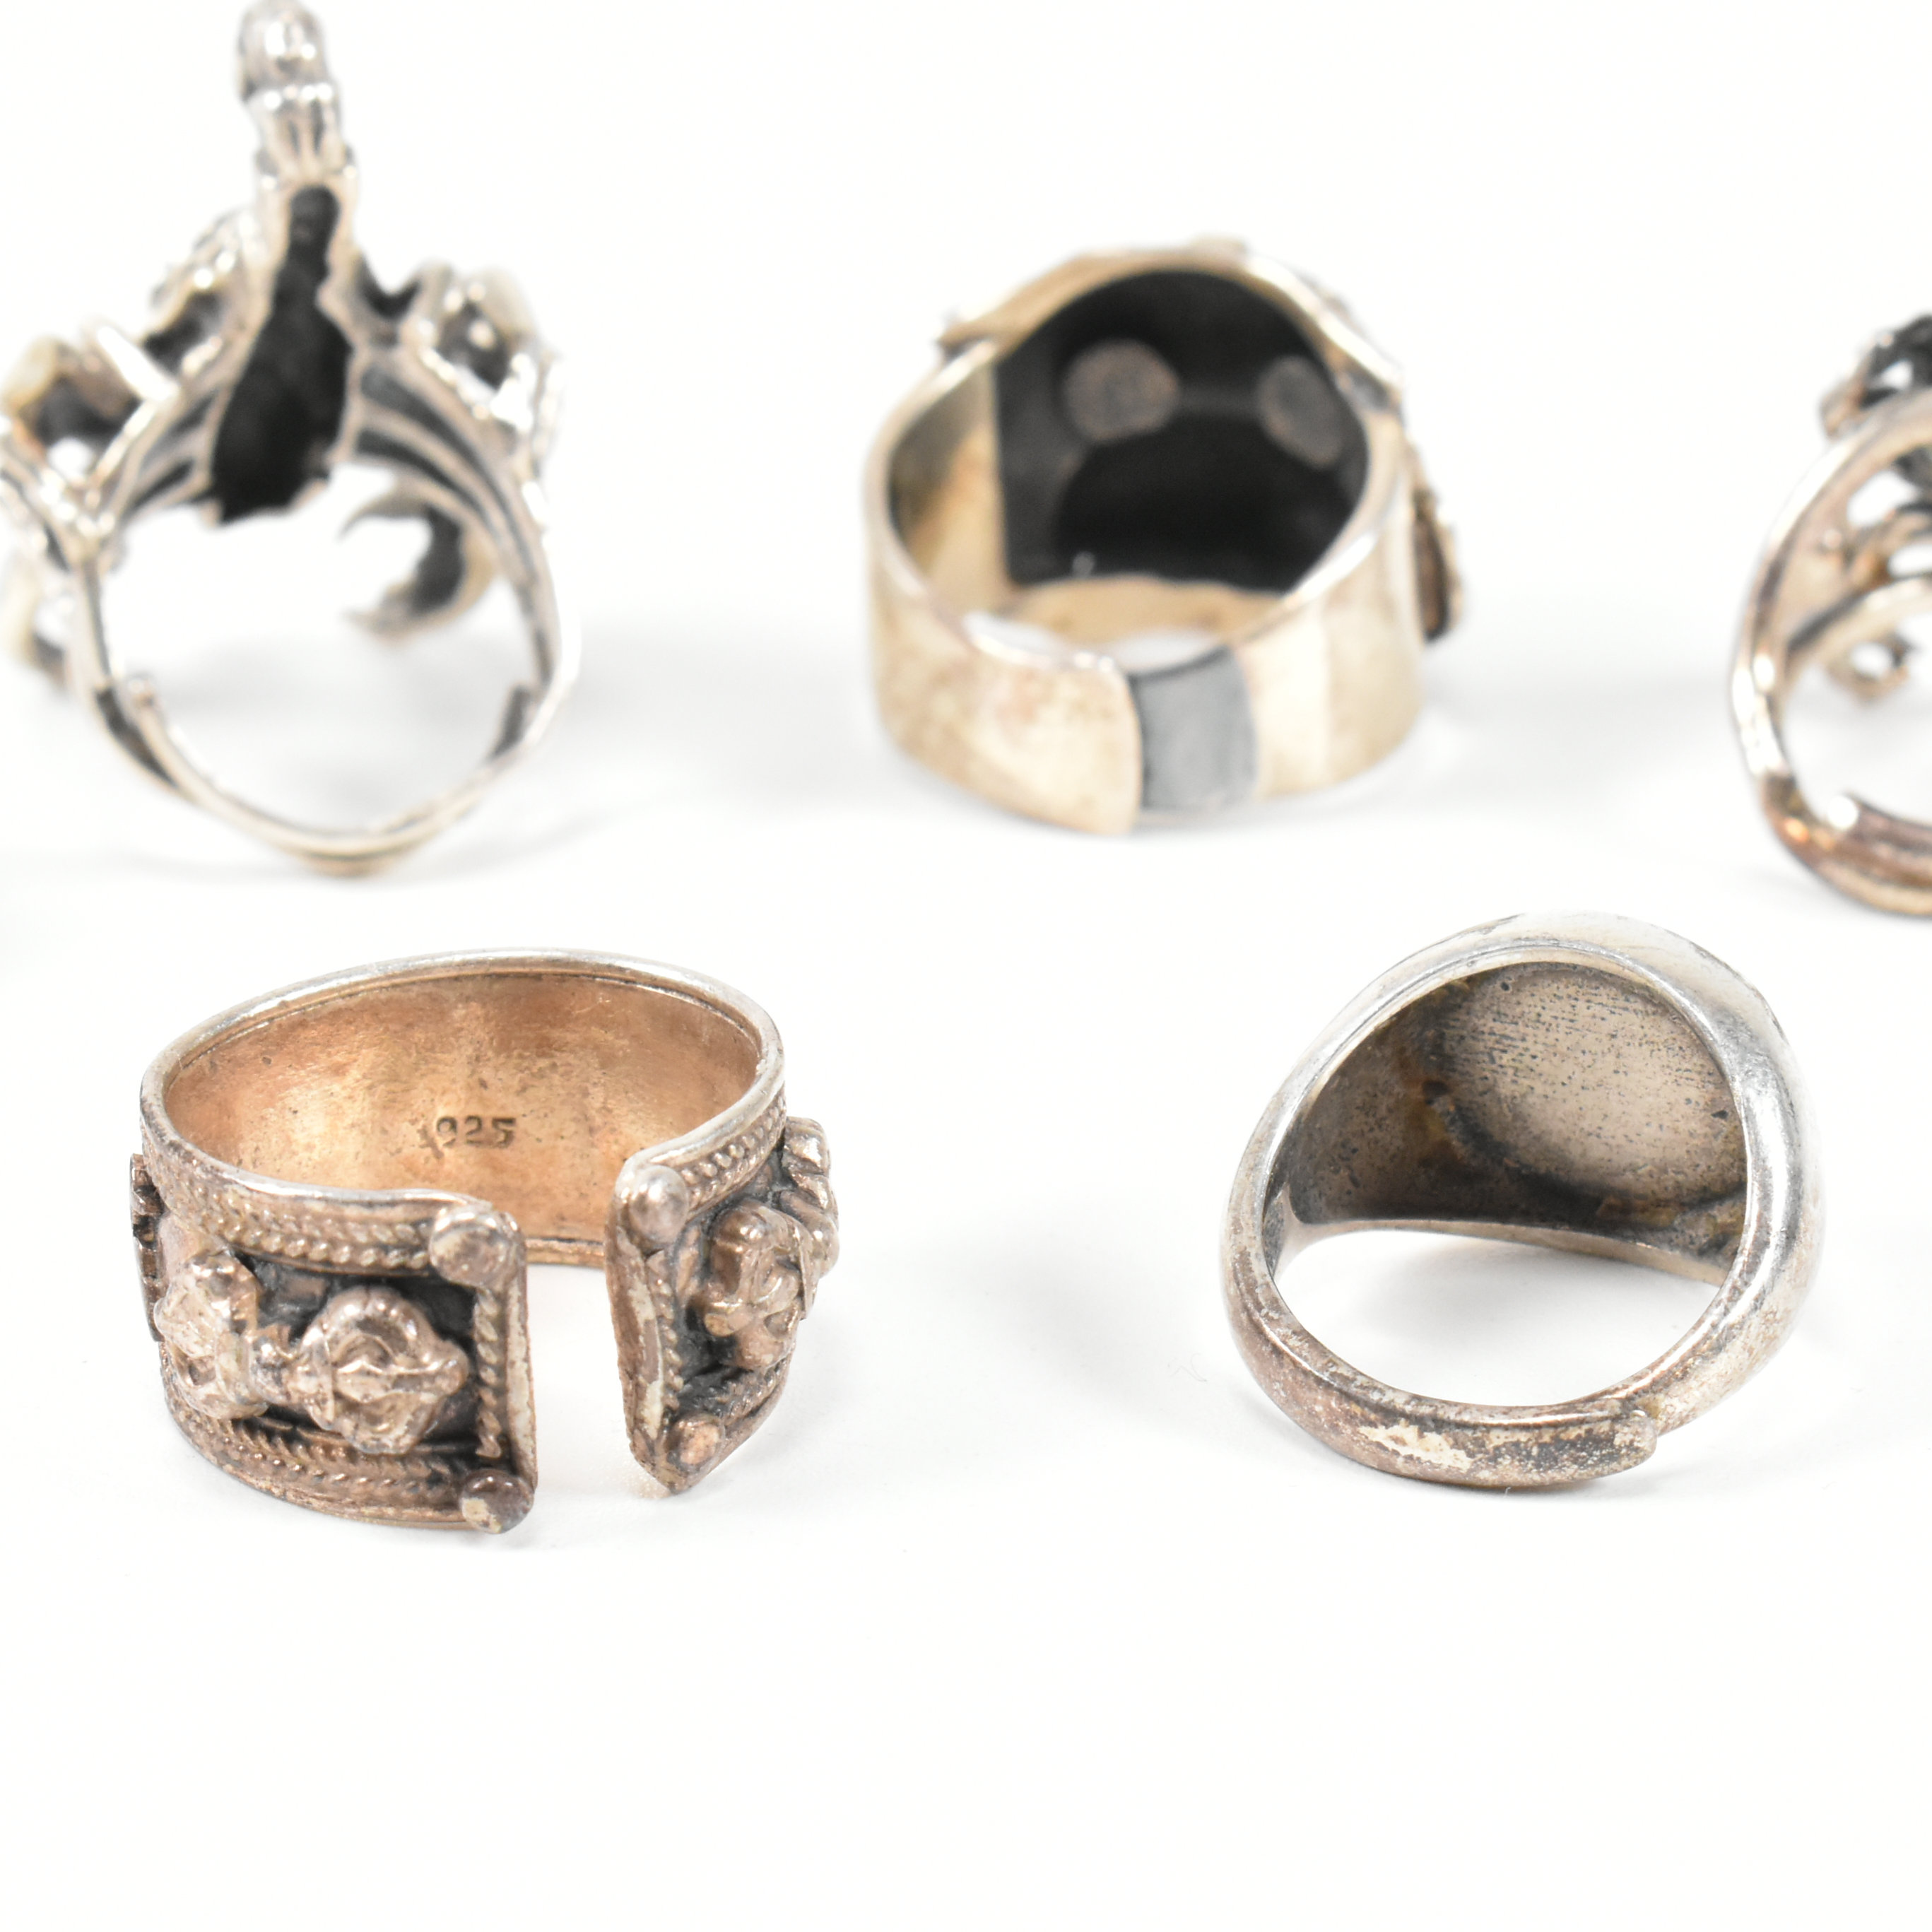 COLLECTION OF CONTEMPORARY 925 SILVER RINGS - Image 6 of 7